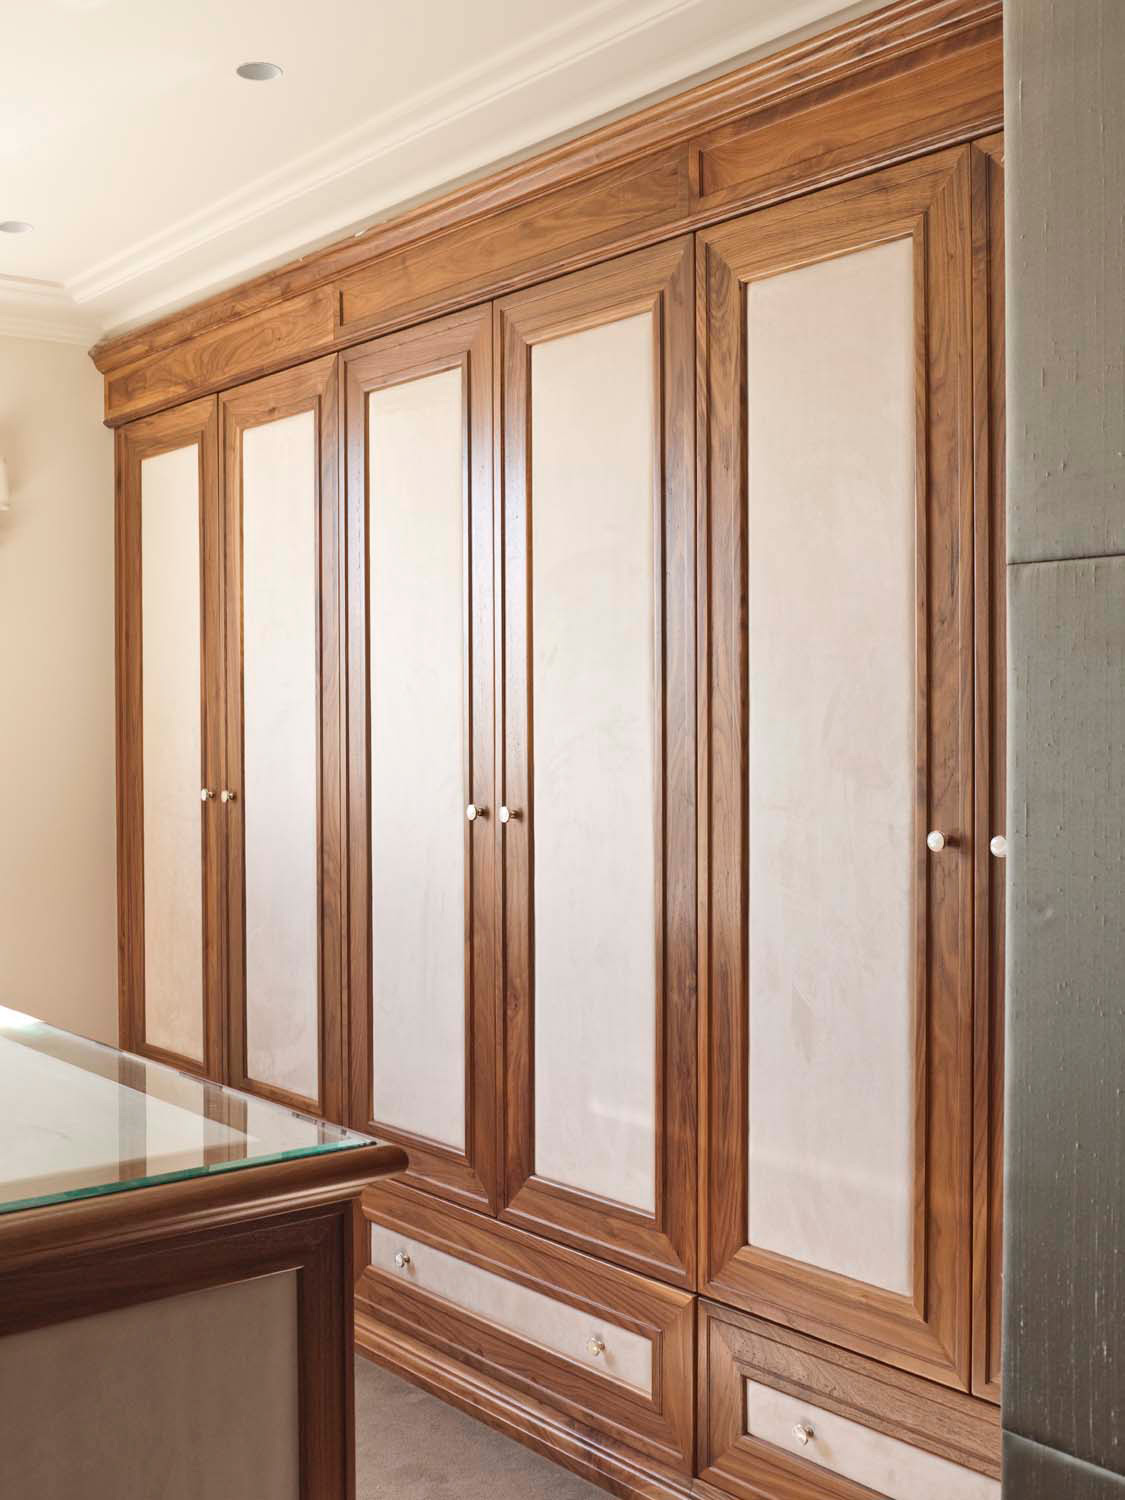 6 Custom designed wardrobe with timber bordered doors and drawers